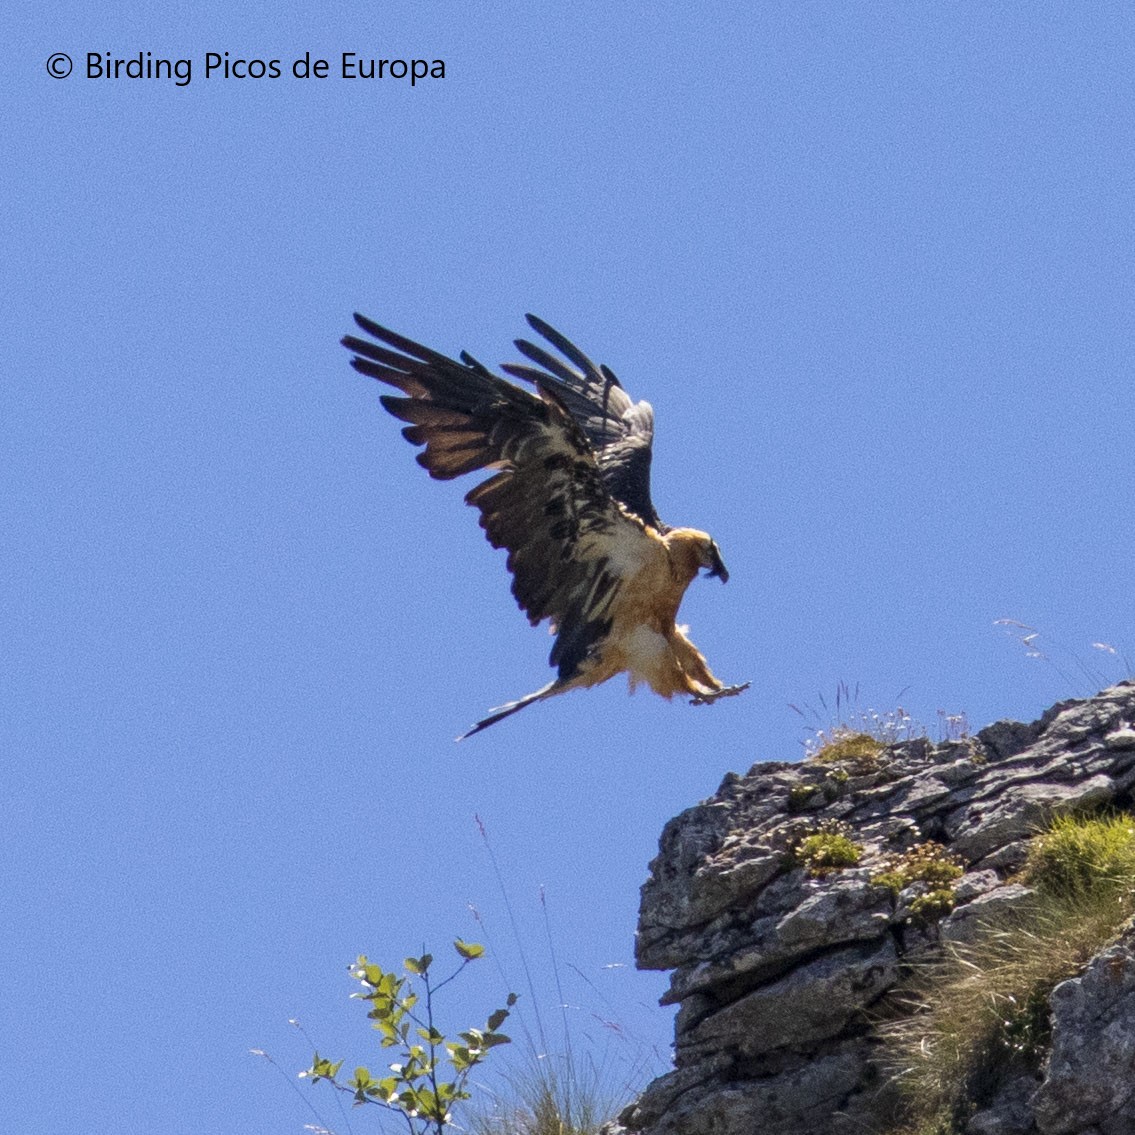 The Bearded Vulture